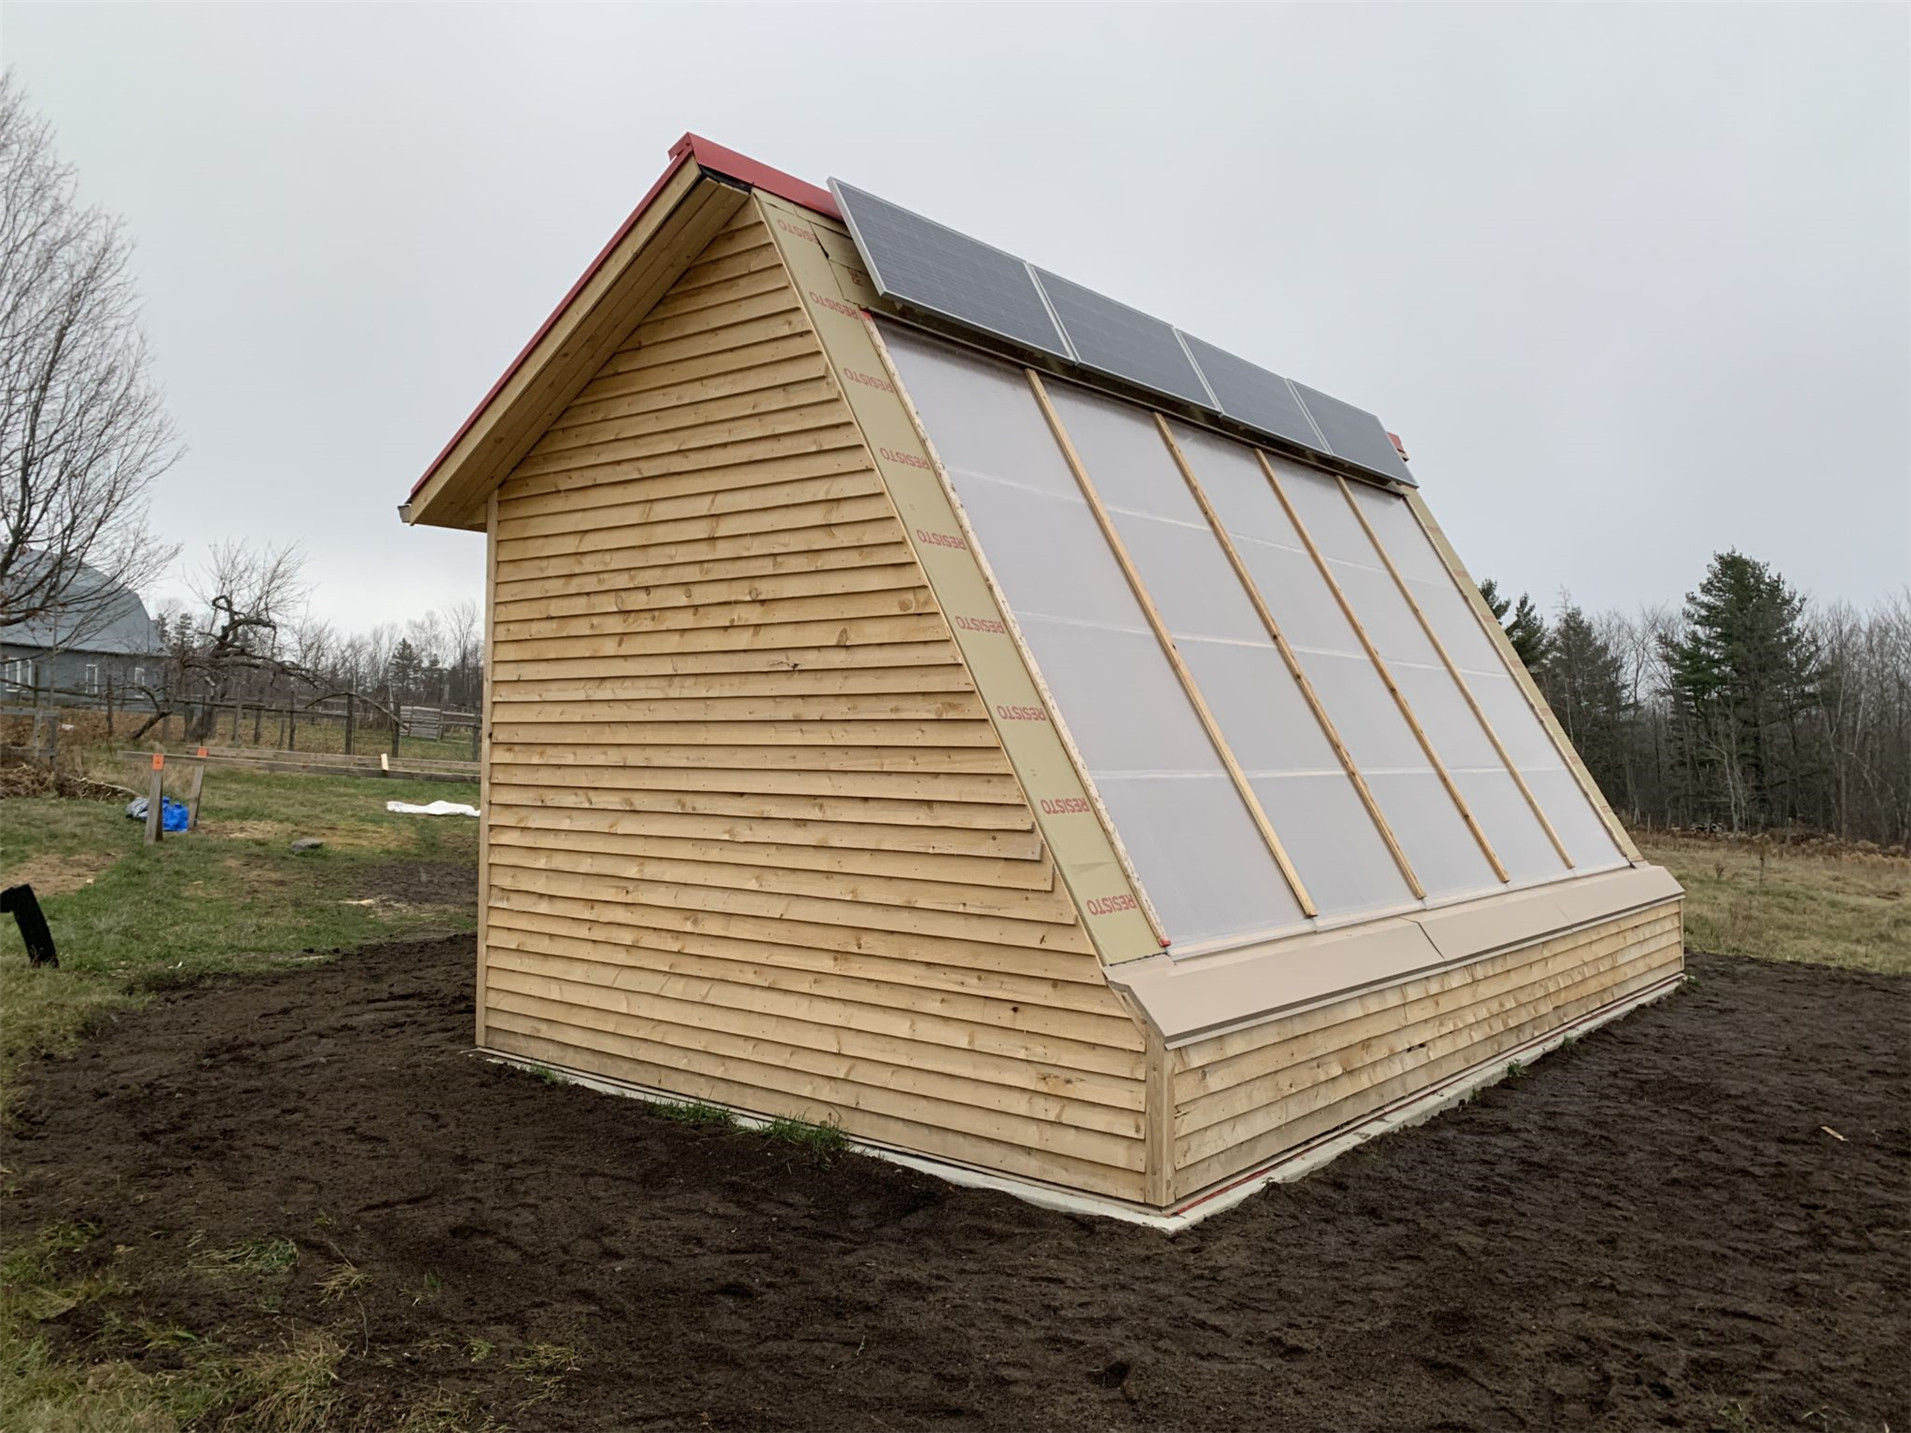 A Creative Solar Greenhouse for Crops